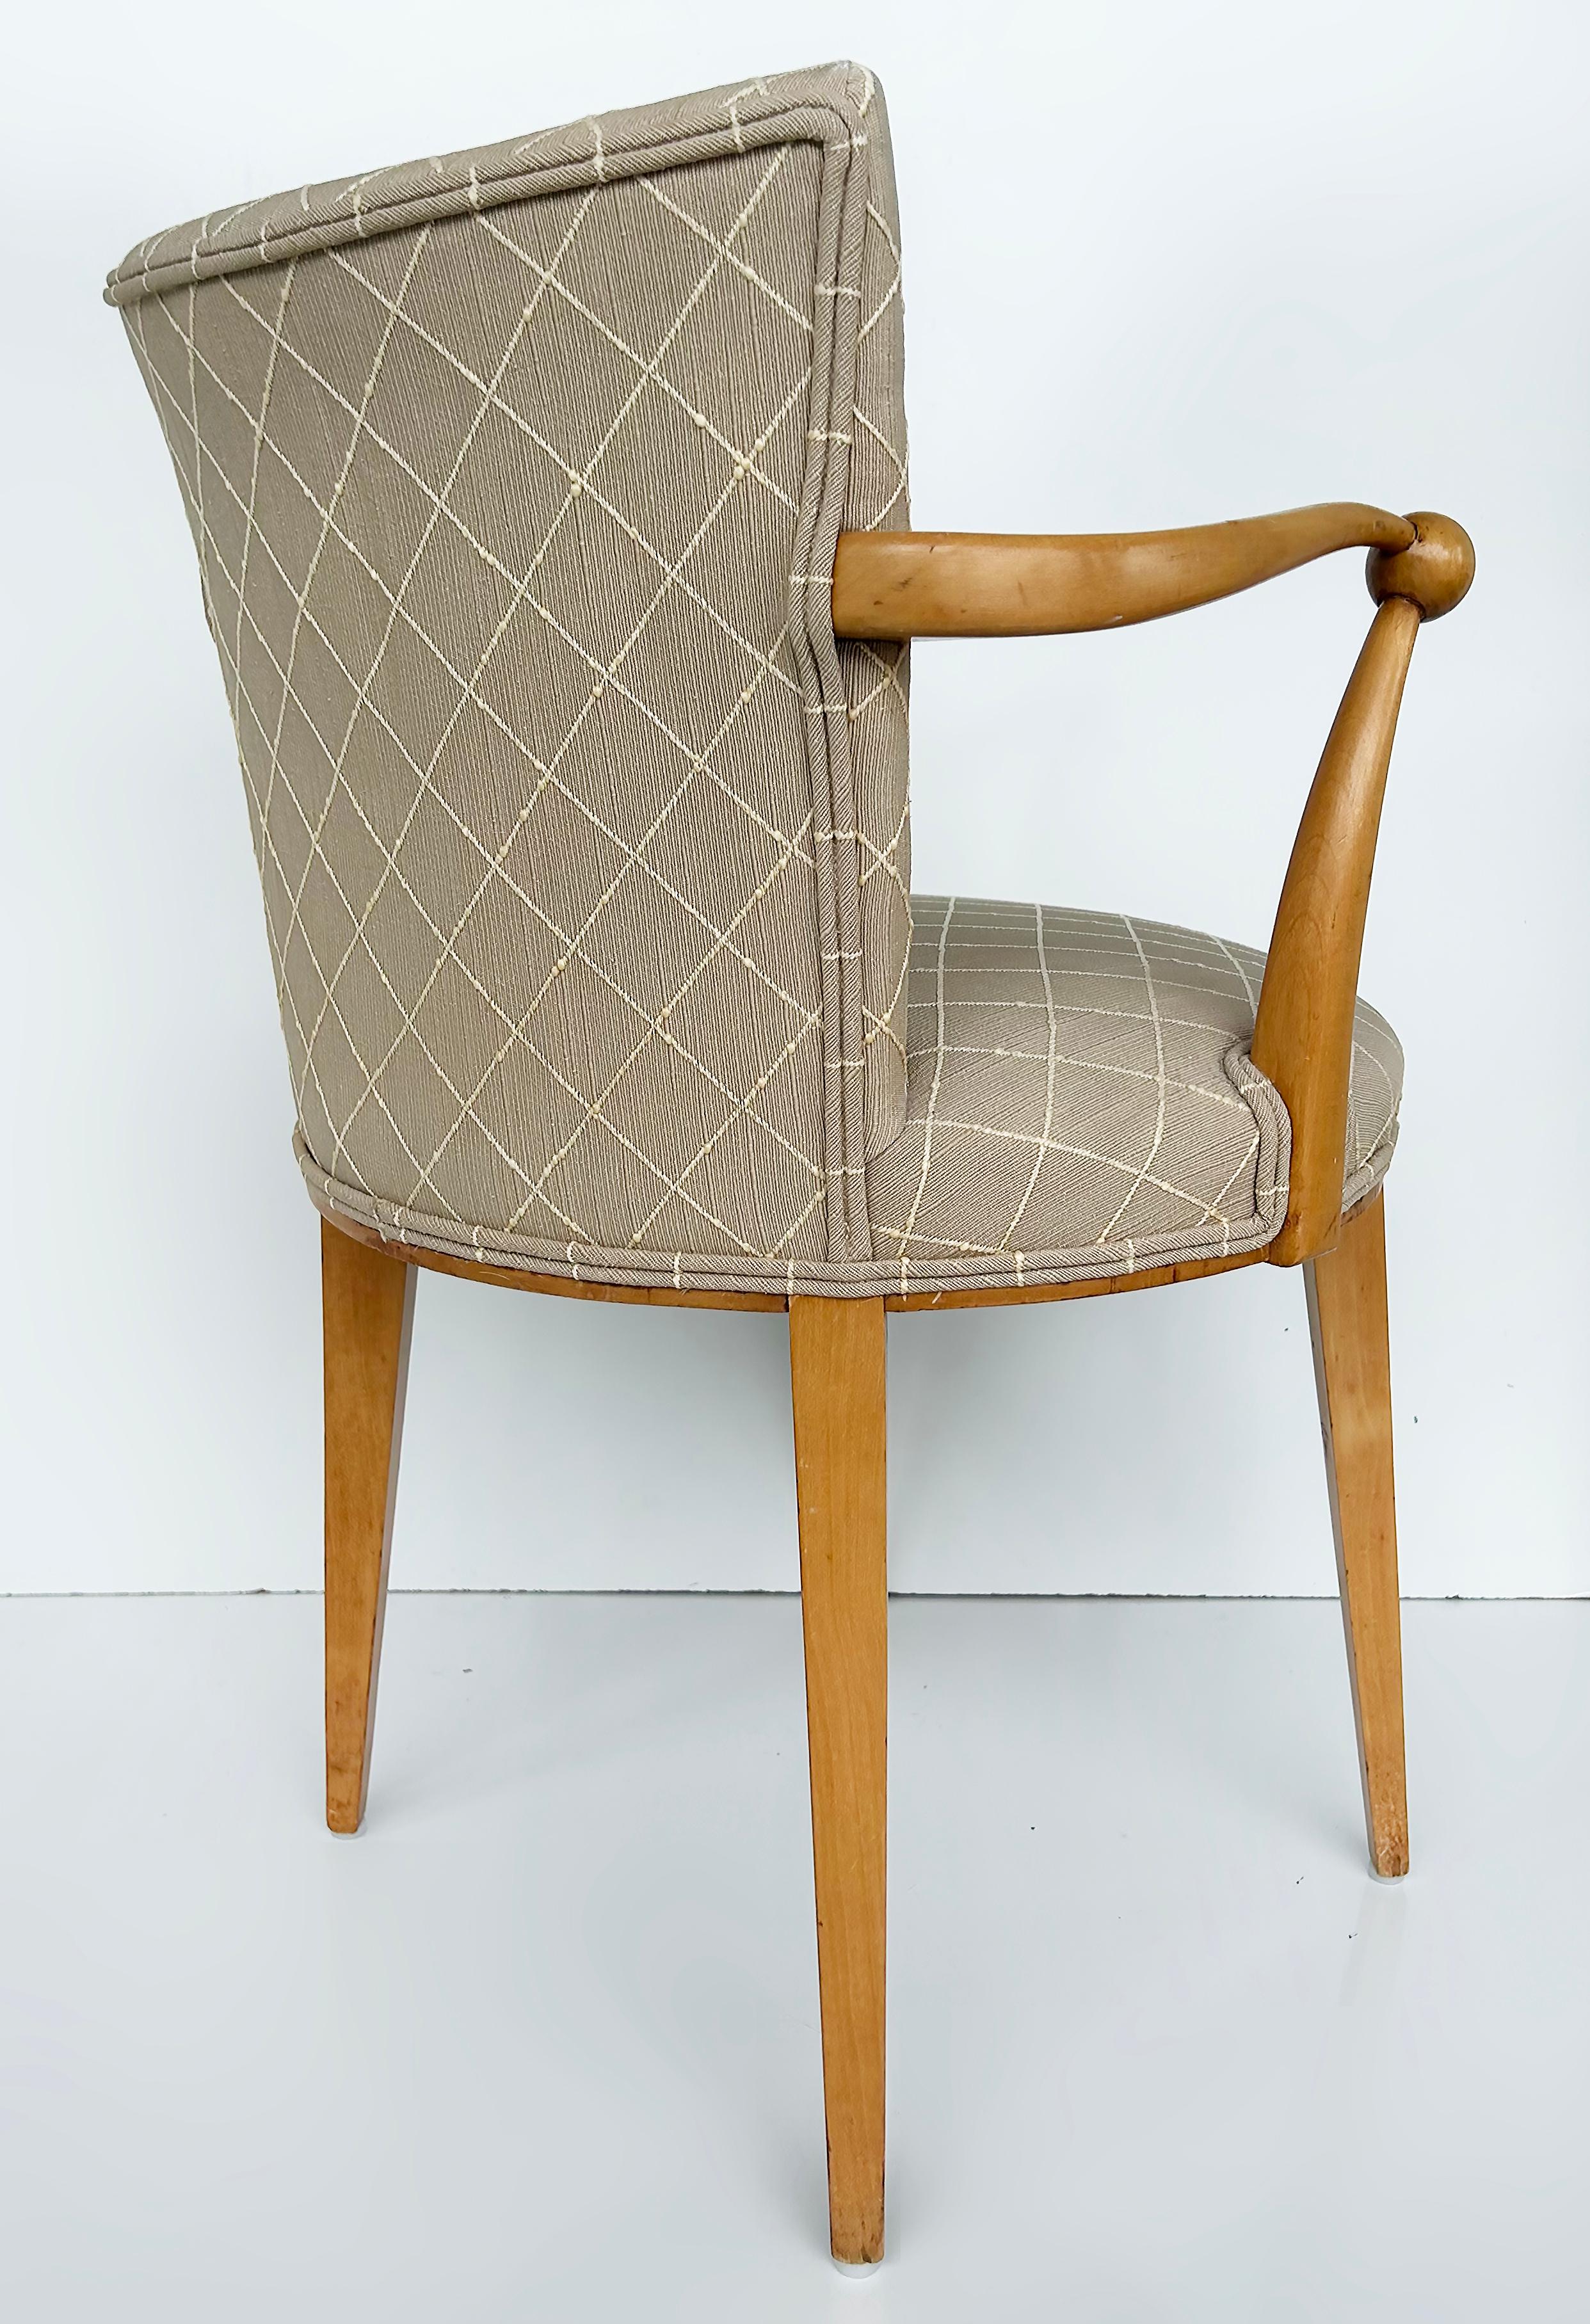 20th Century Sycamore Wood Upholstered Vanity or Desk Chair with Stylized Wood Arms and Legs For Sale